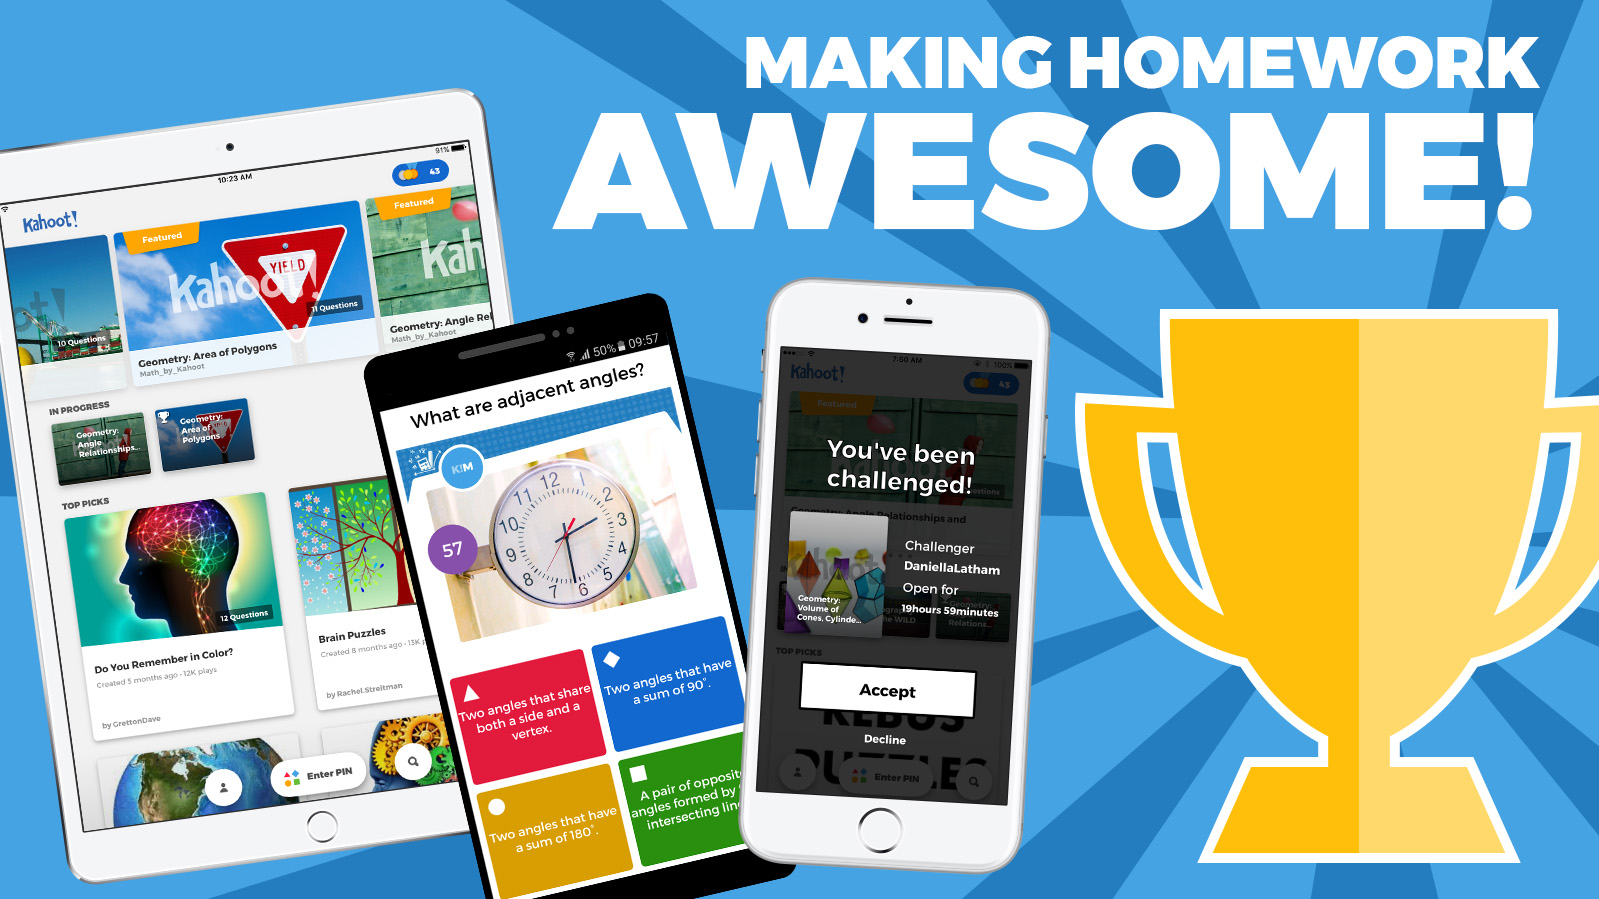 Kahoot! launches a new mobile app to make homework awesome